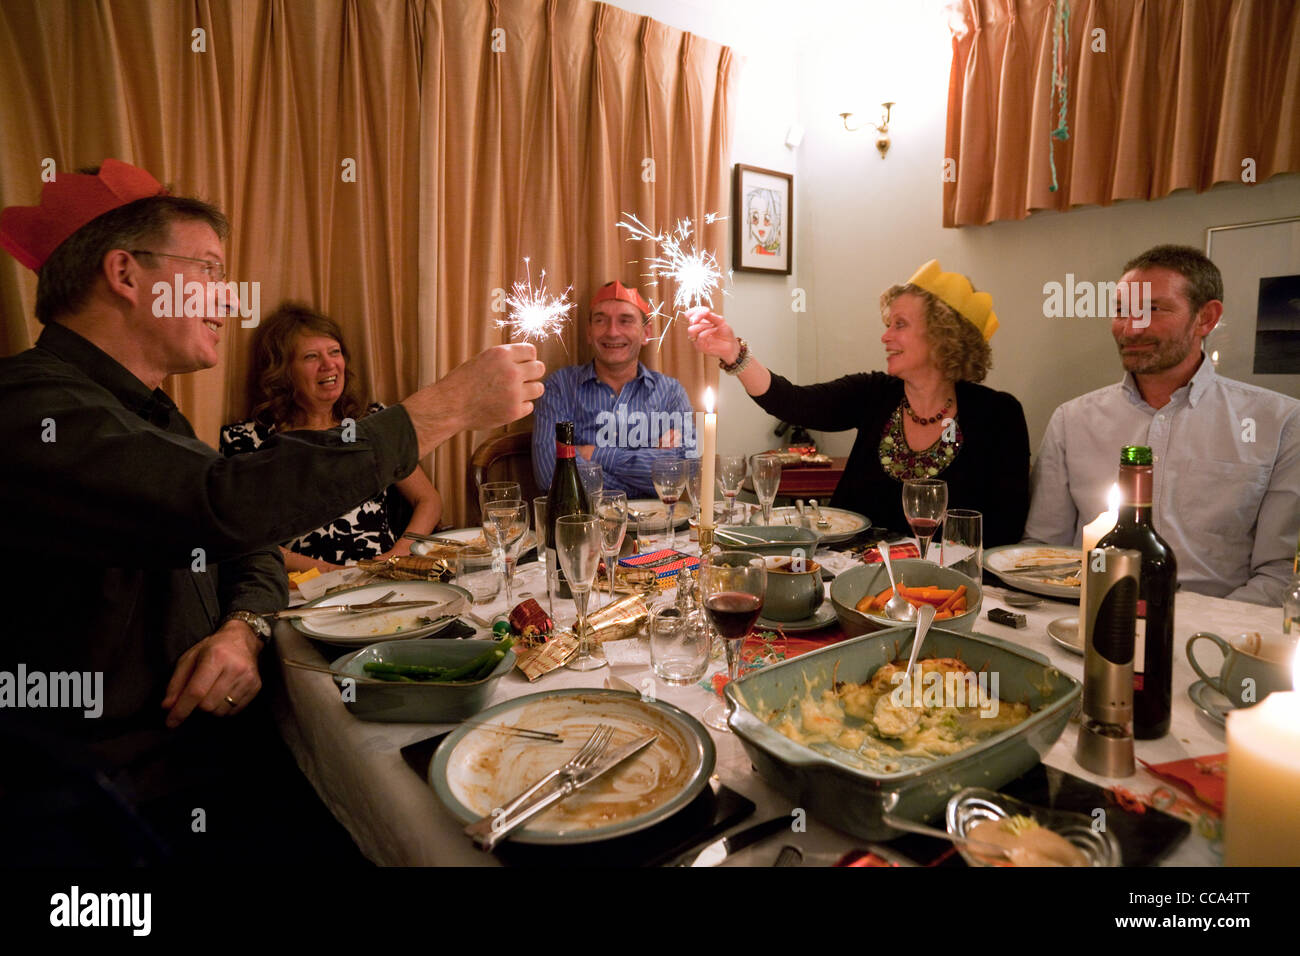 Five adults at the dinner table with indoor fireworks at a dinner party for New Years eve celebrations at home, UK Stock Photo